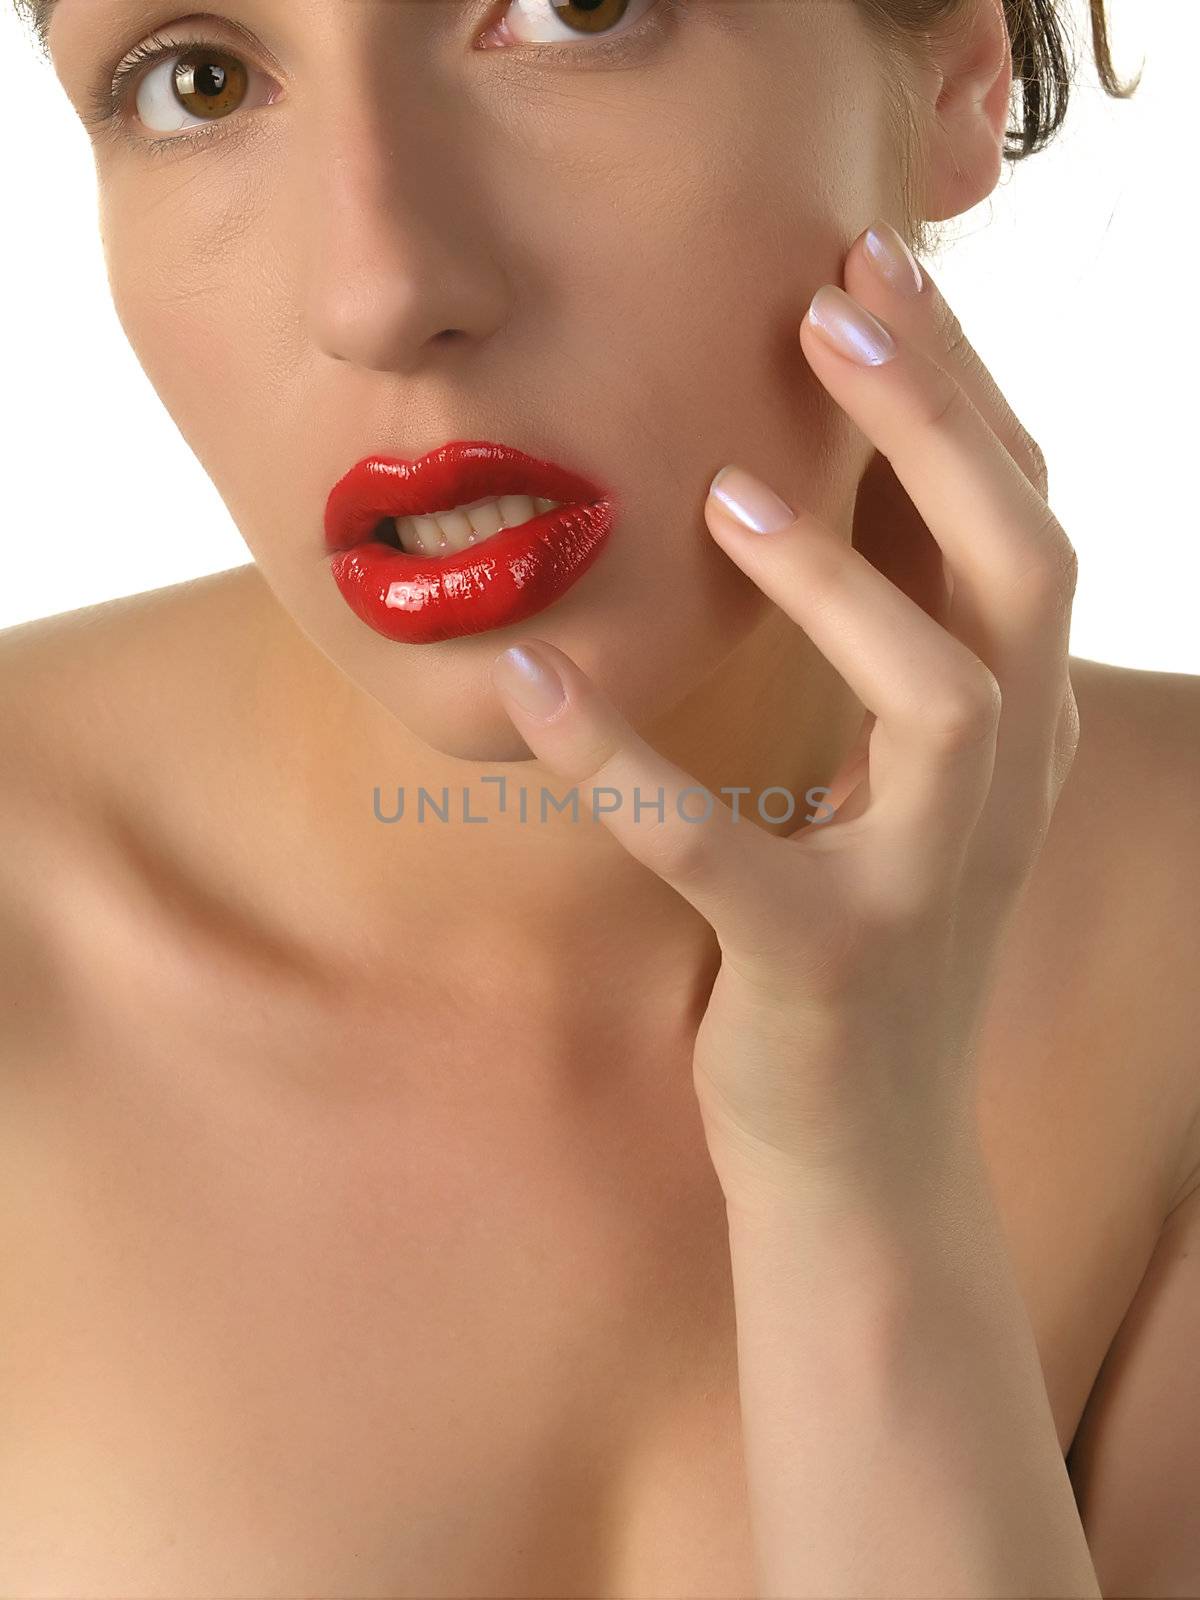 Hand ans Lips by adamr